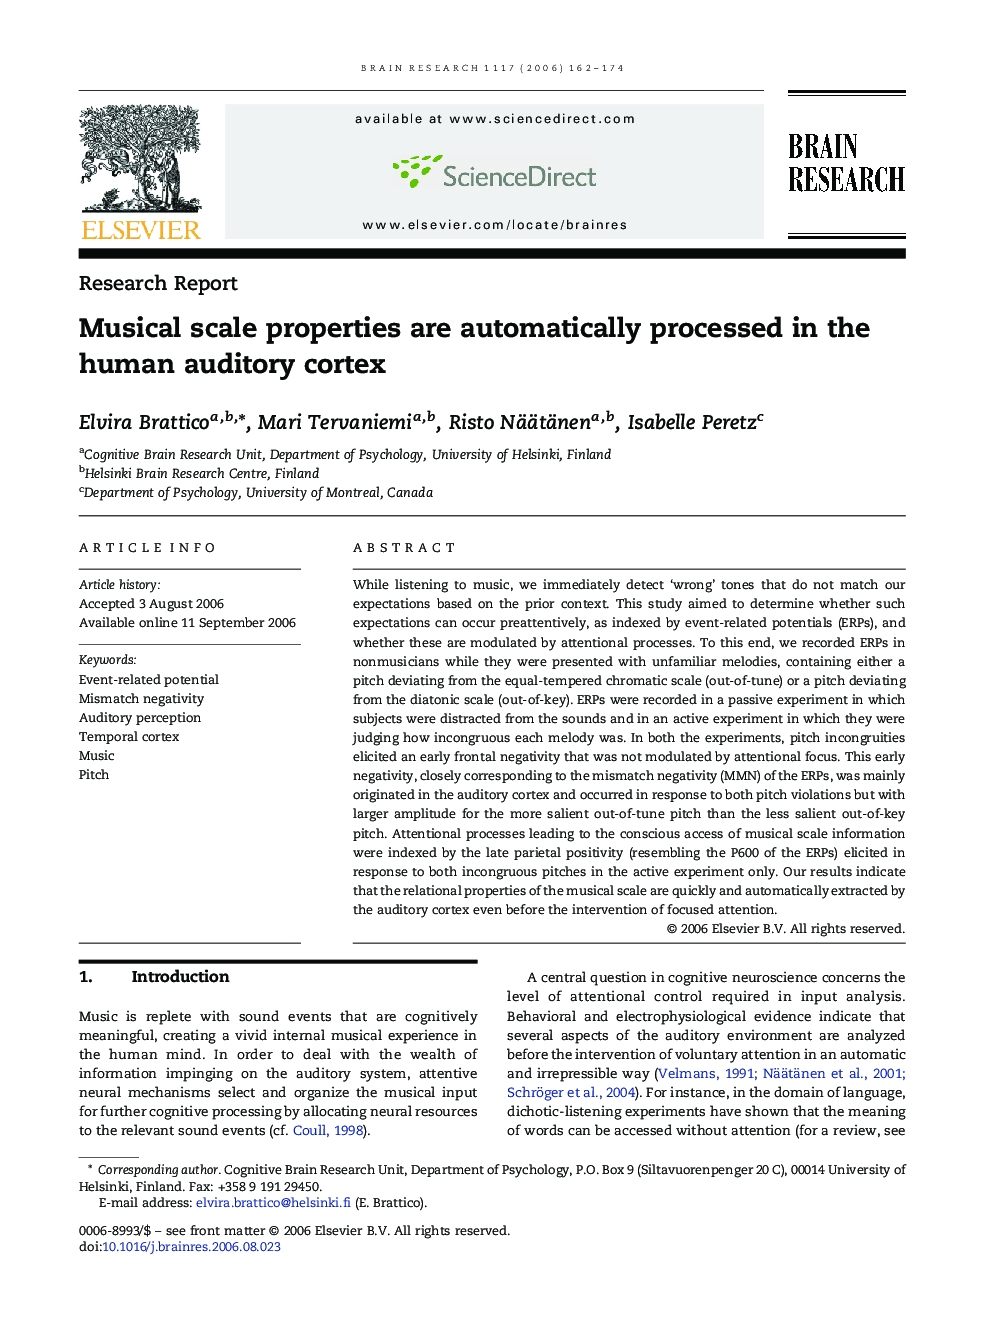 Musical scale properties are automatically processed in the human auditory cortex